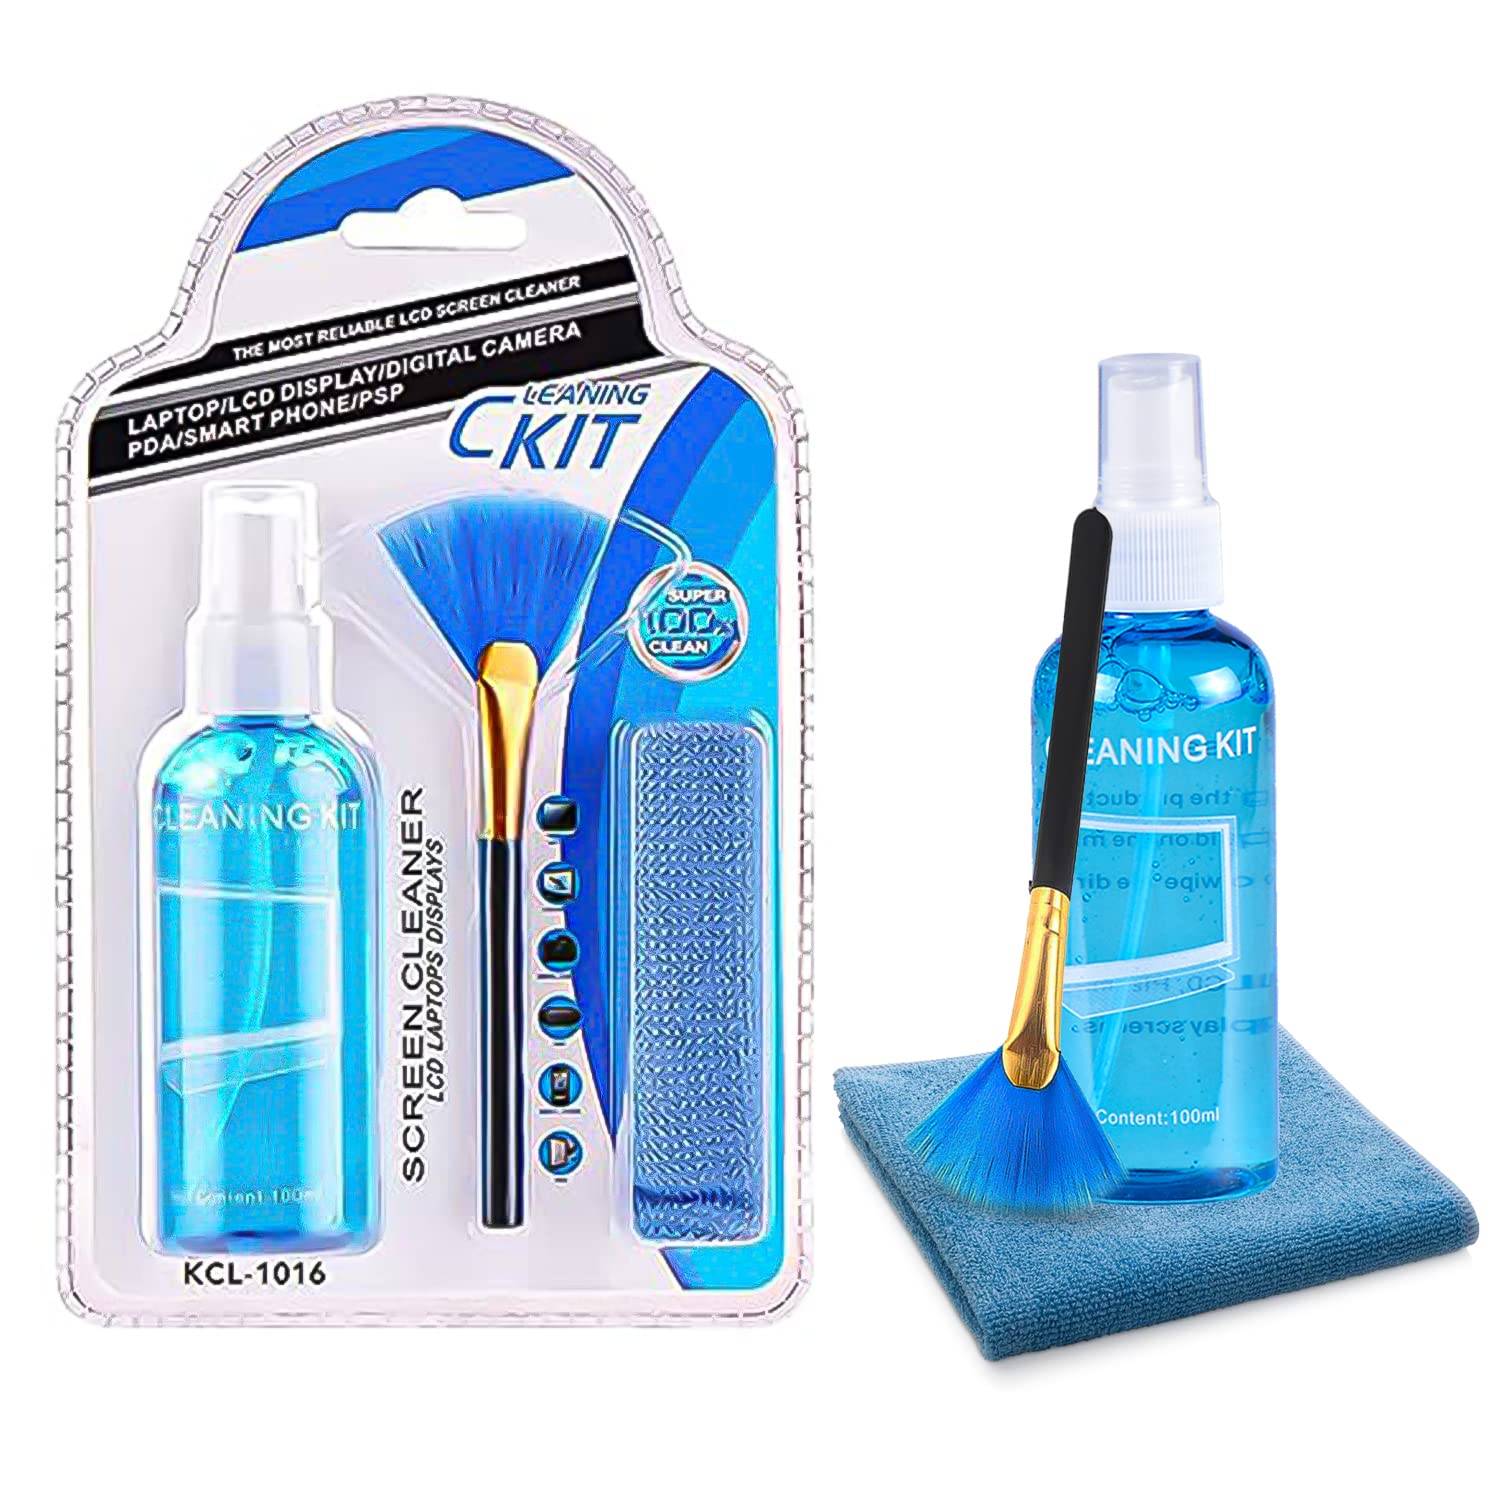 3 in 1 Laptop Cleaning Kit Monitor TV PC LED LCD Screen Cleaner Cloth Brush